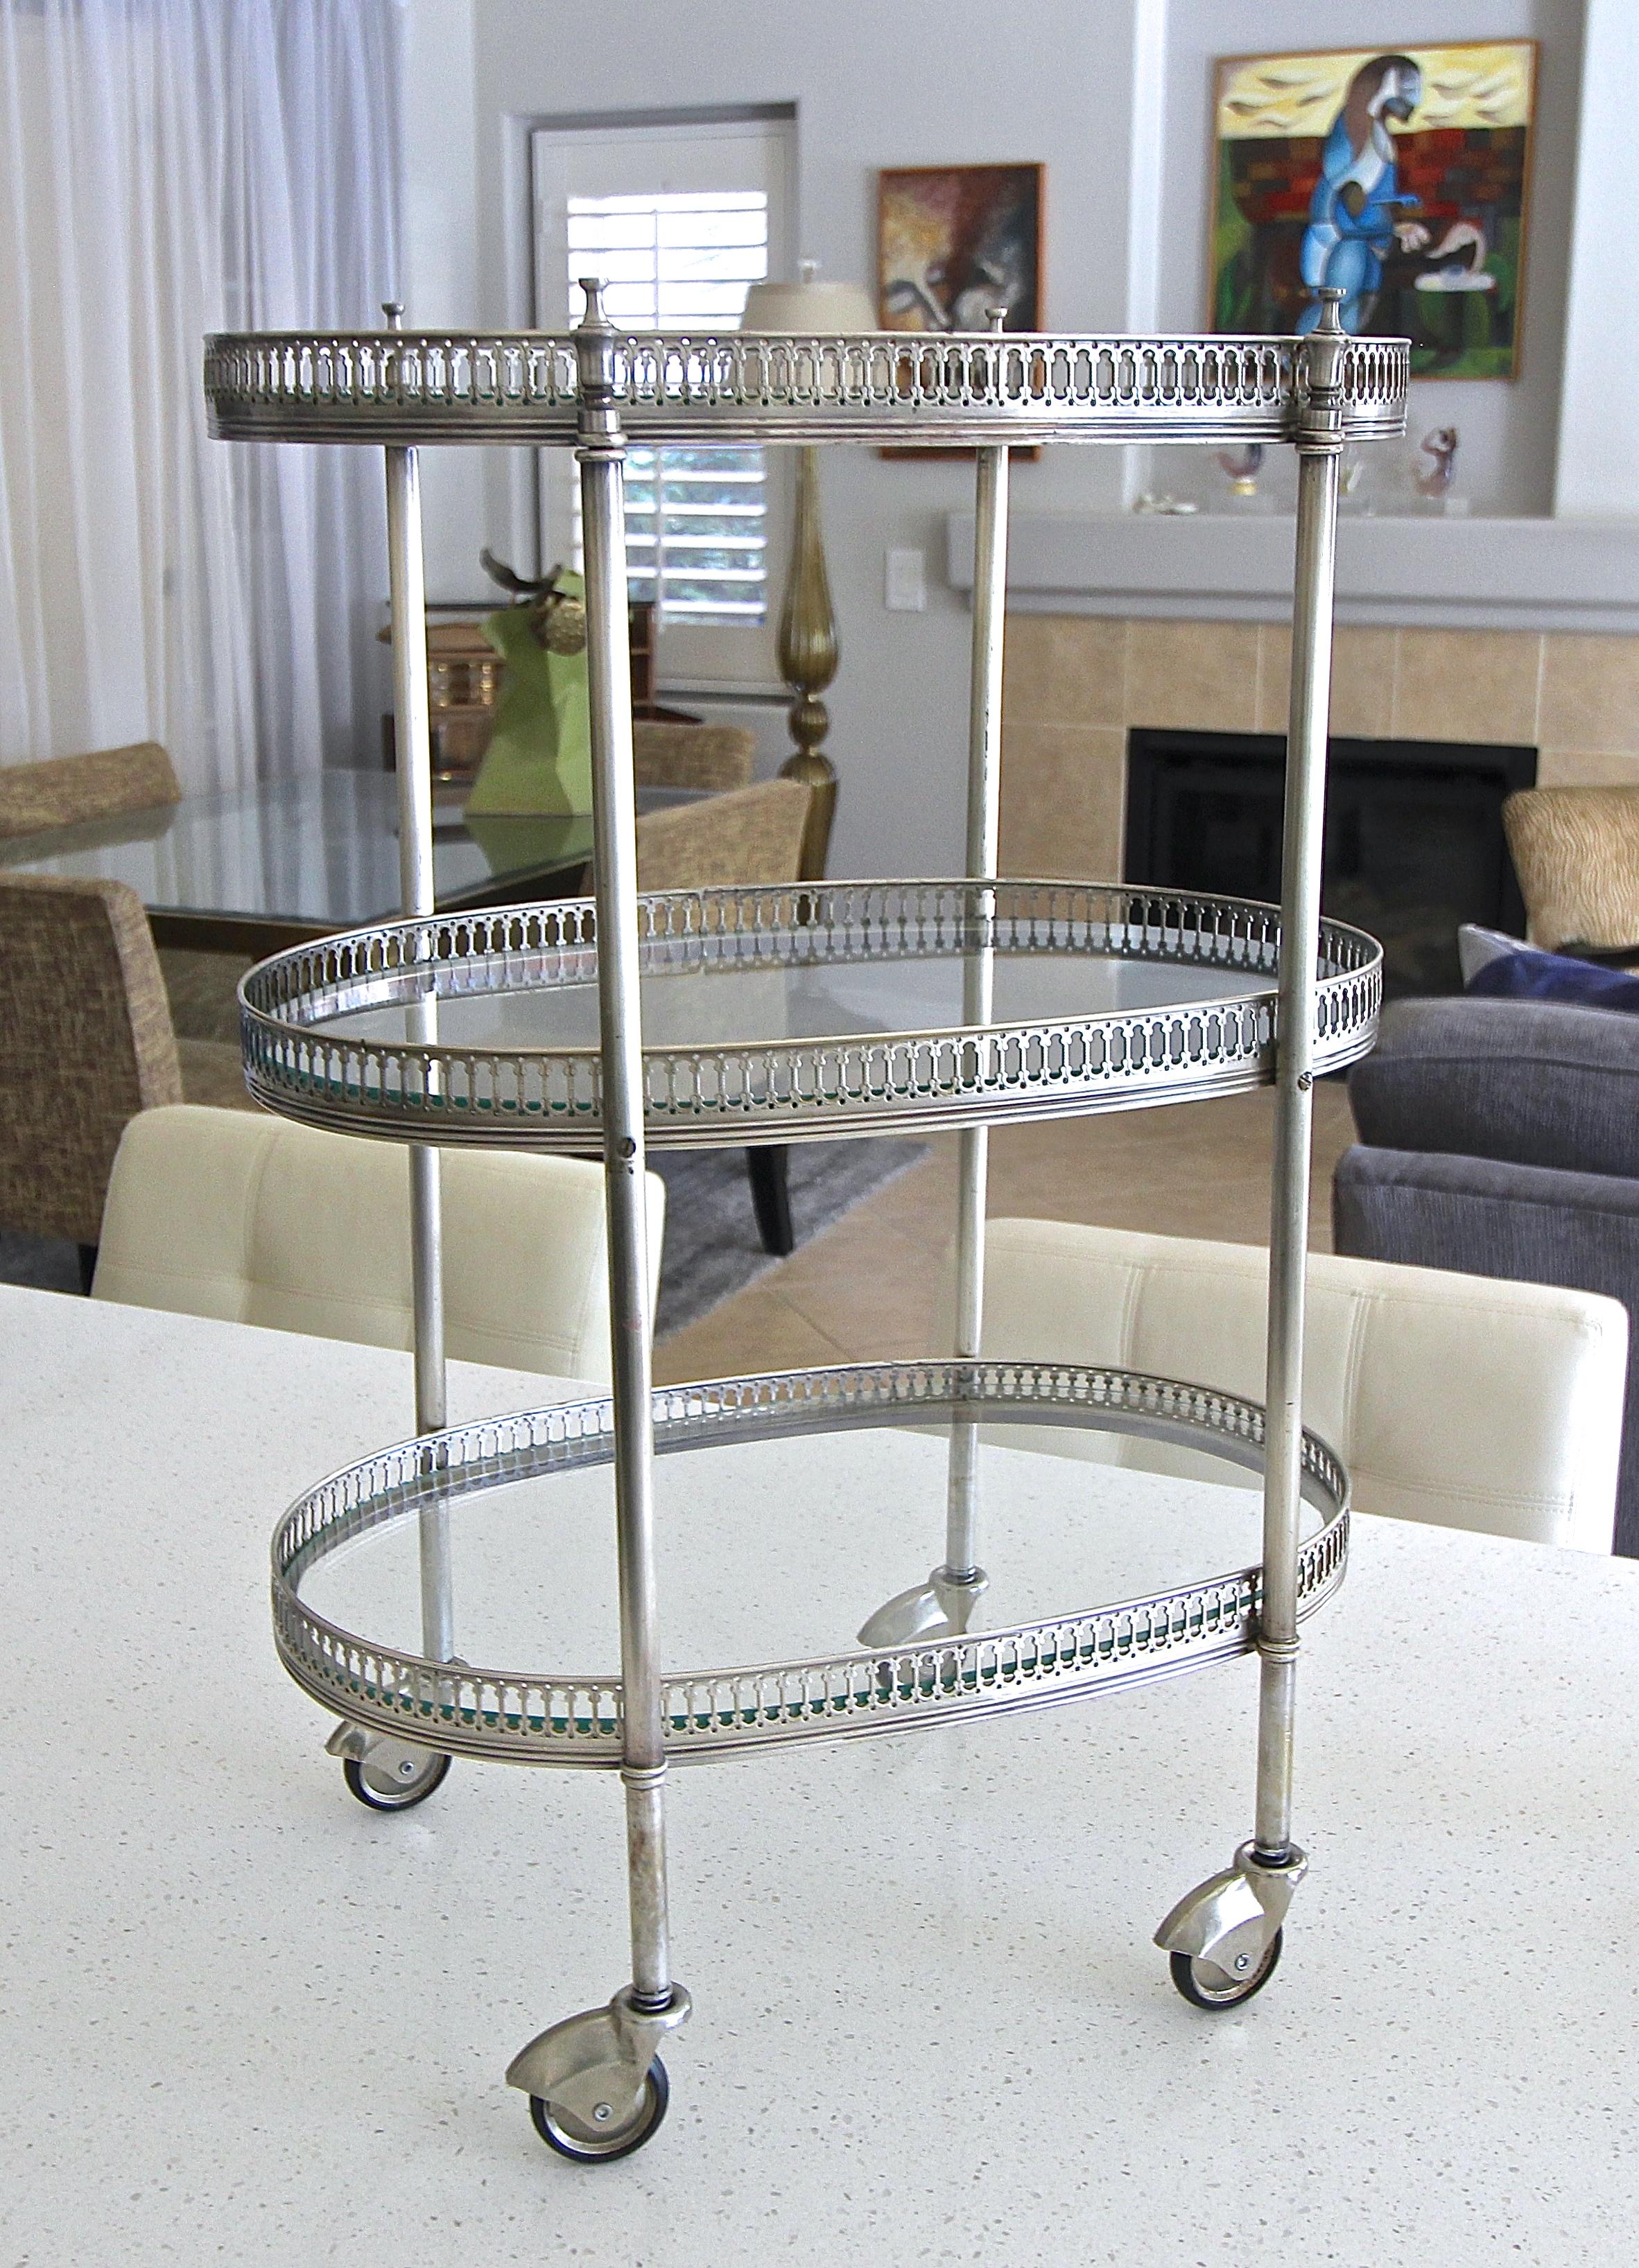 French oval three-tier silver plated smaller scale bar cart, with inset glass shelves and caster wheels. Can also be used as side or end table. Nice refined details in the delicate gallery.